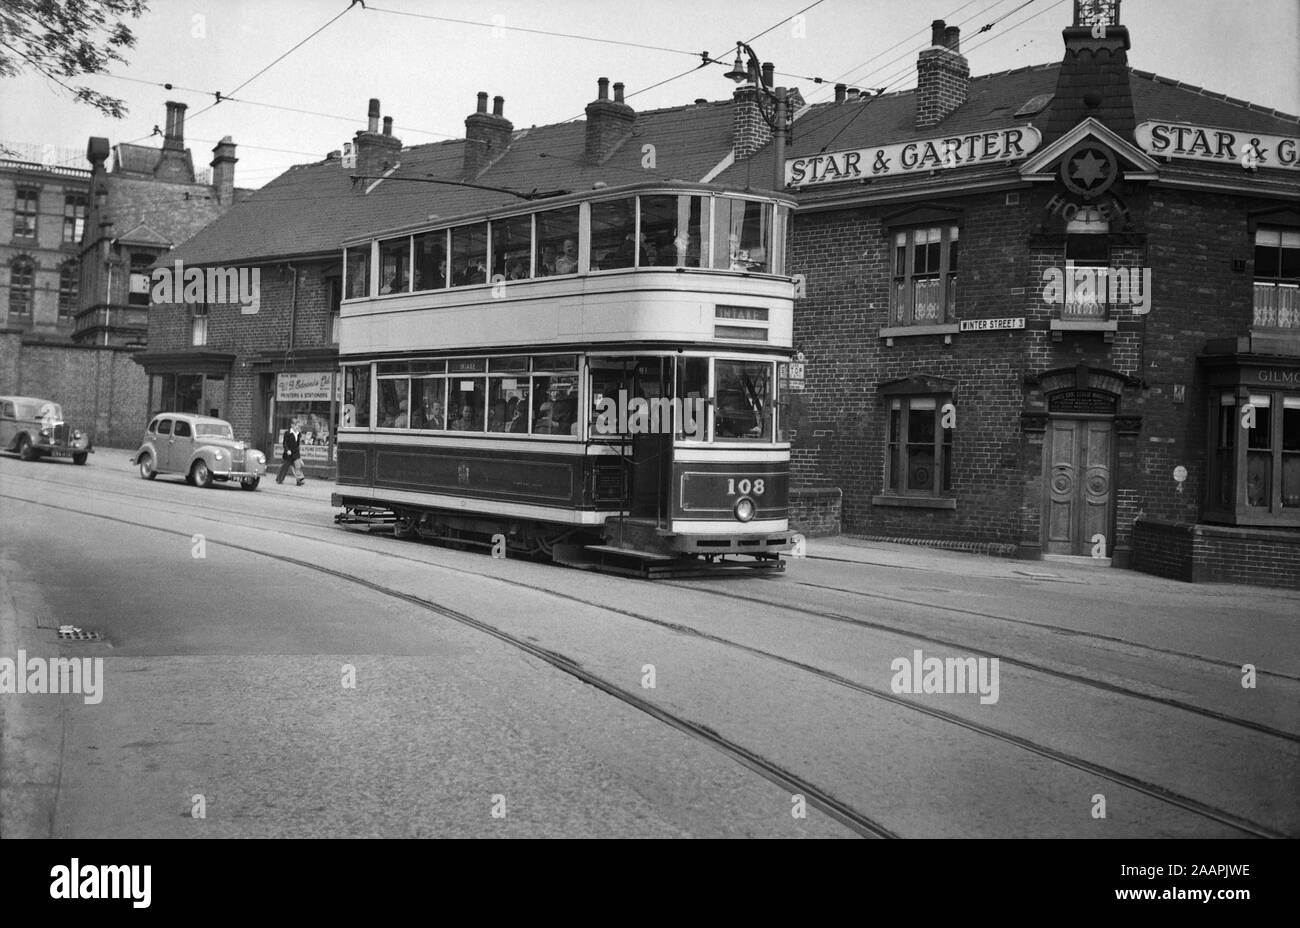 Sheffield Standard Tram no 108 on route to Intake. Image taken outside the Star and Garter Hotel and Pub on Winter Street, Sheffield 3 The Star and Garter has since closed and the area is under redevelopment. Image taken during the 1950s Stock Photo